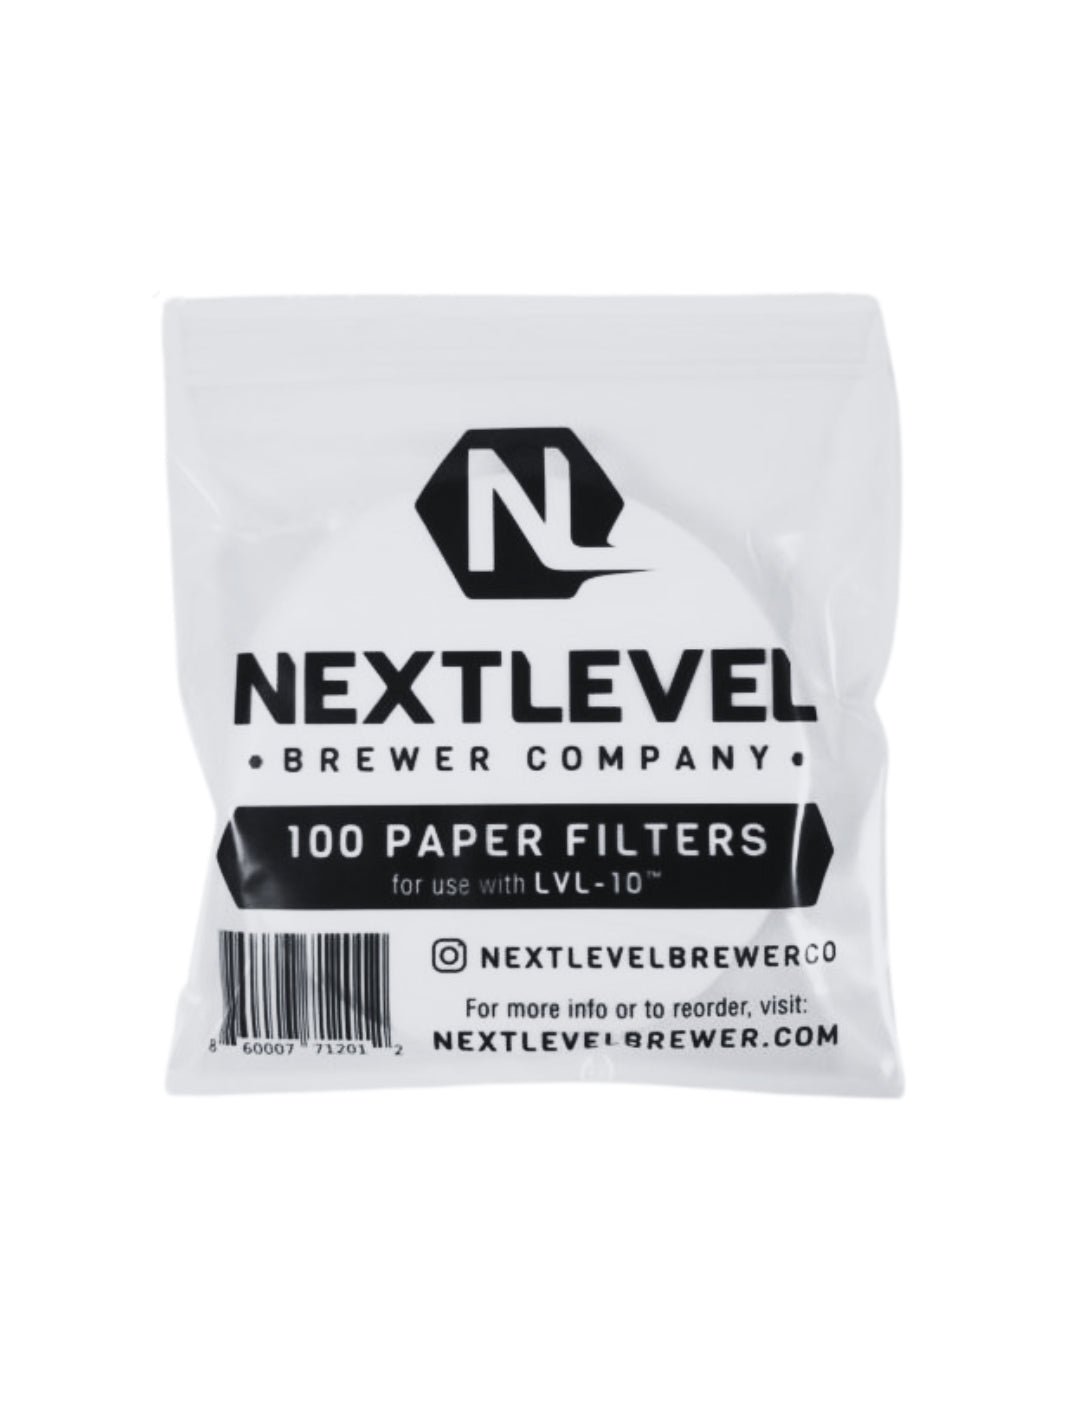 NEXTLEVEL LVL-10 Brewer Premium Paper Filters (100-Pack)